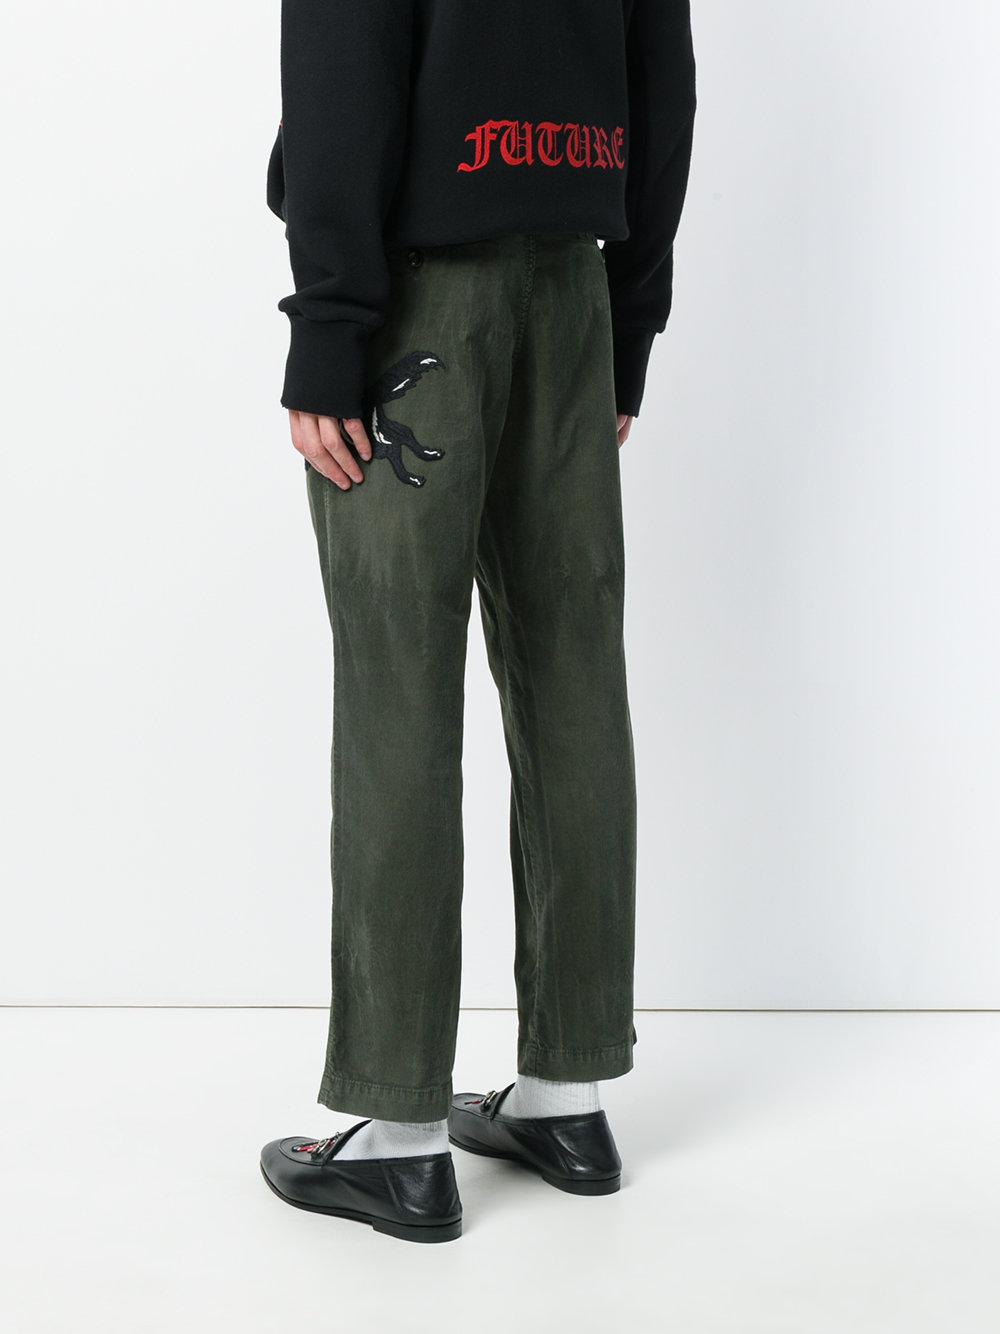 Gucci Wolf Embroidered Corduroy Trousers in Green for Men - Lyst